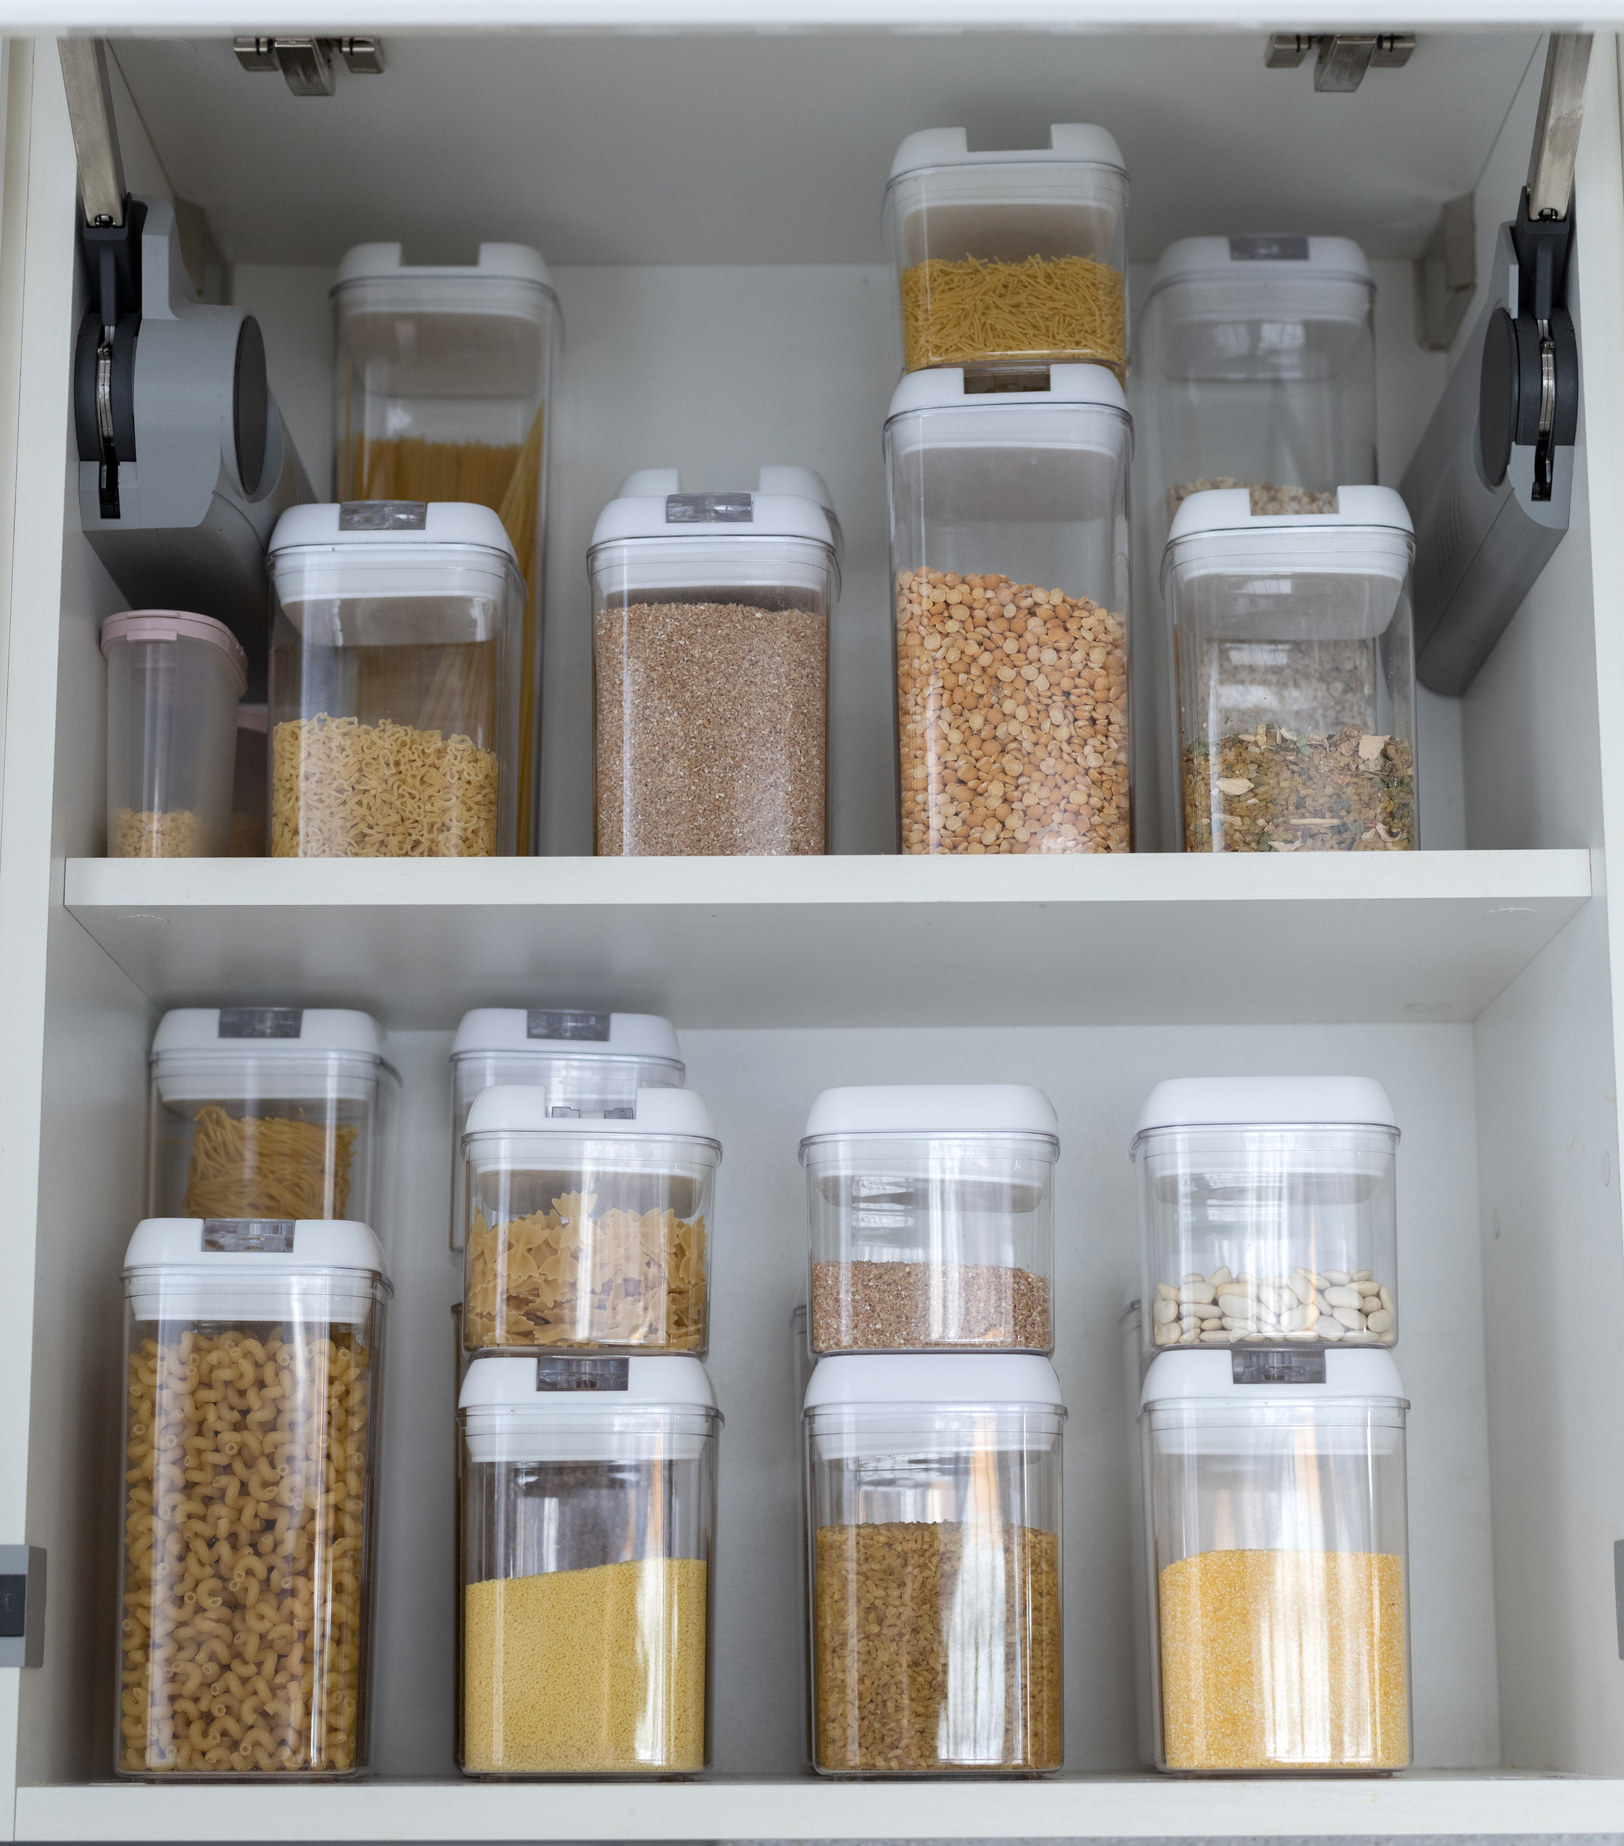 Food storage containers filled with cereals in the kitchen pantry